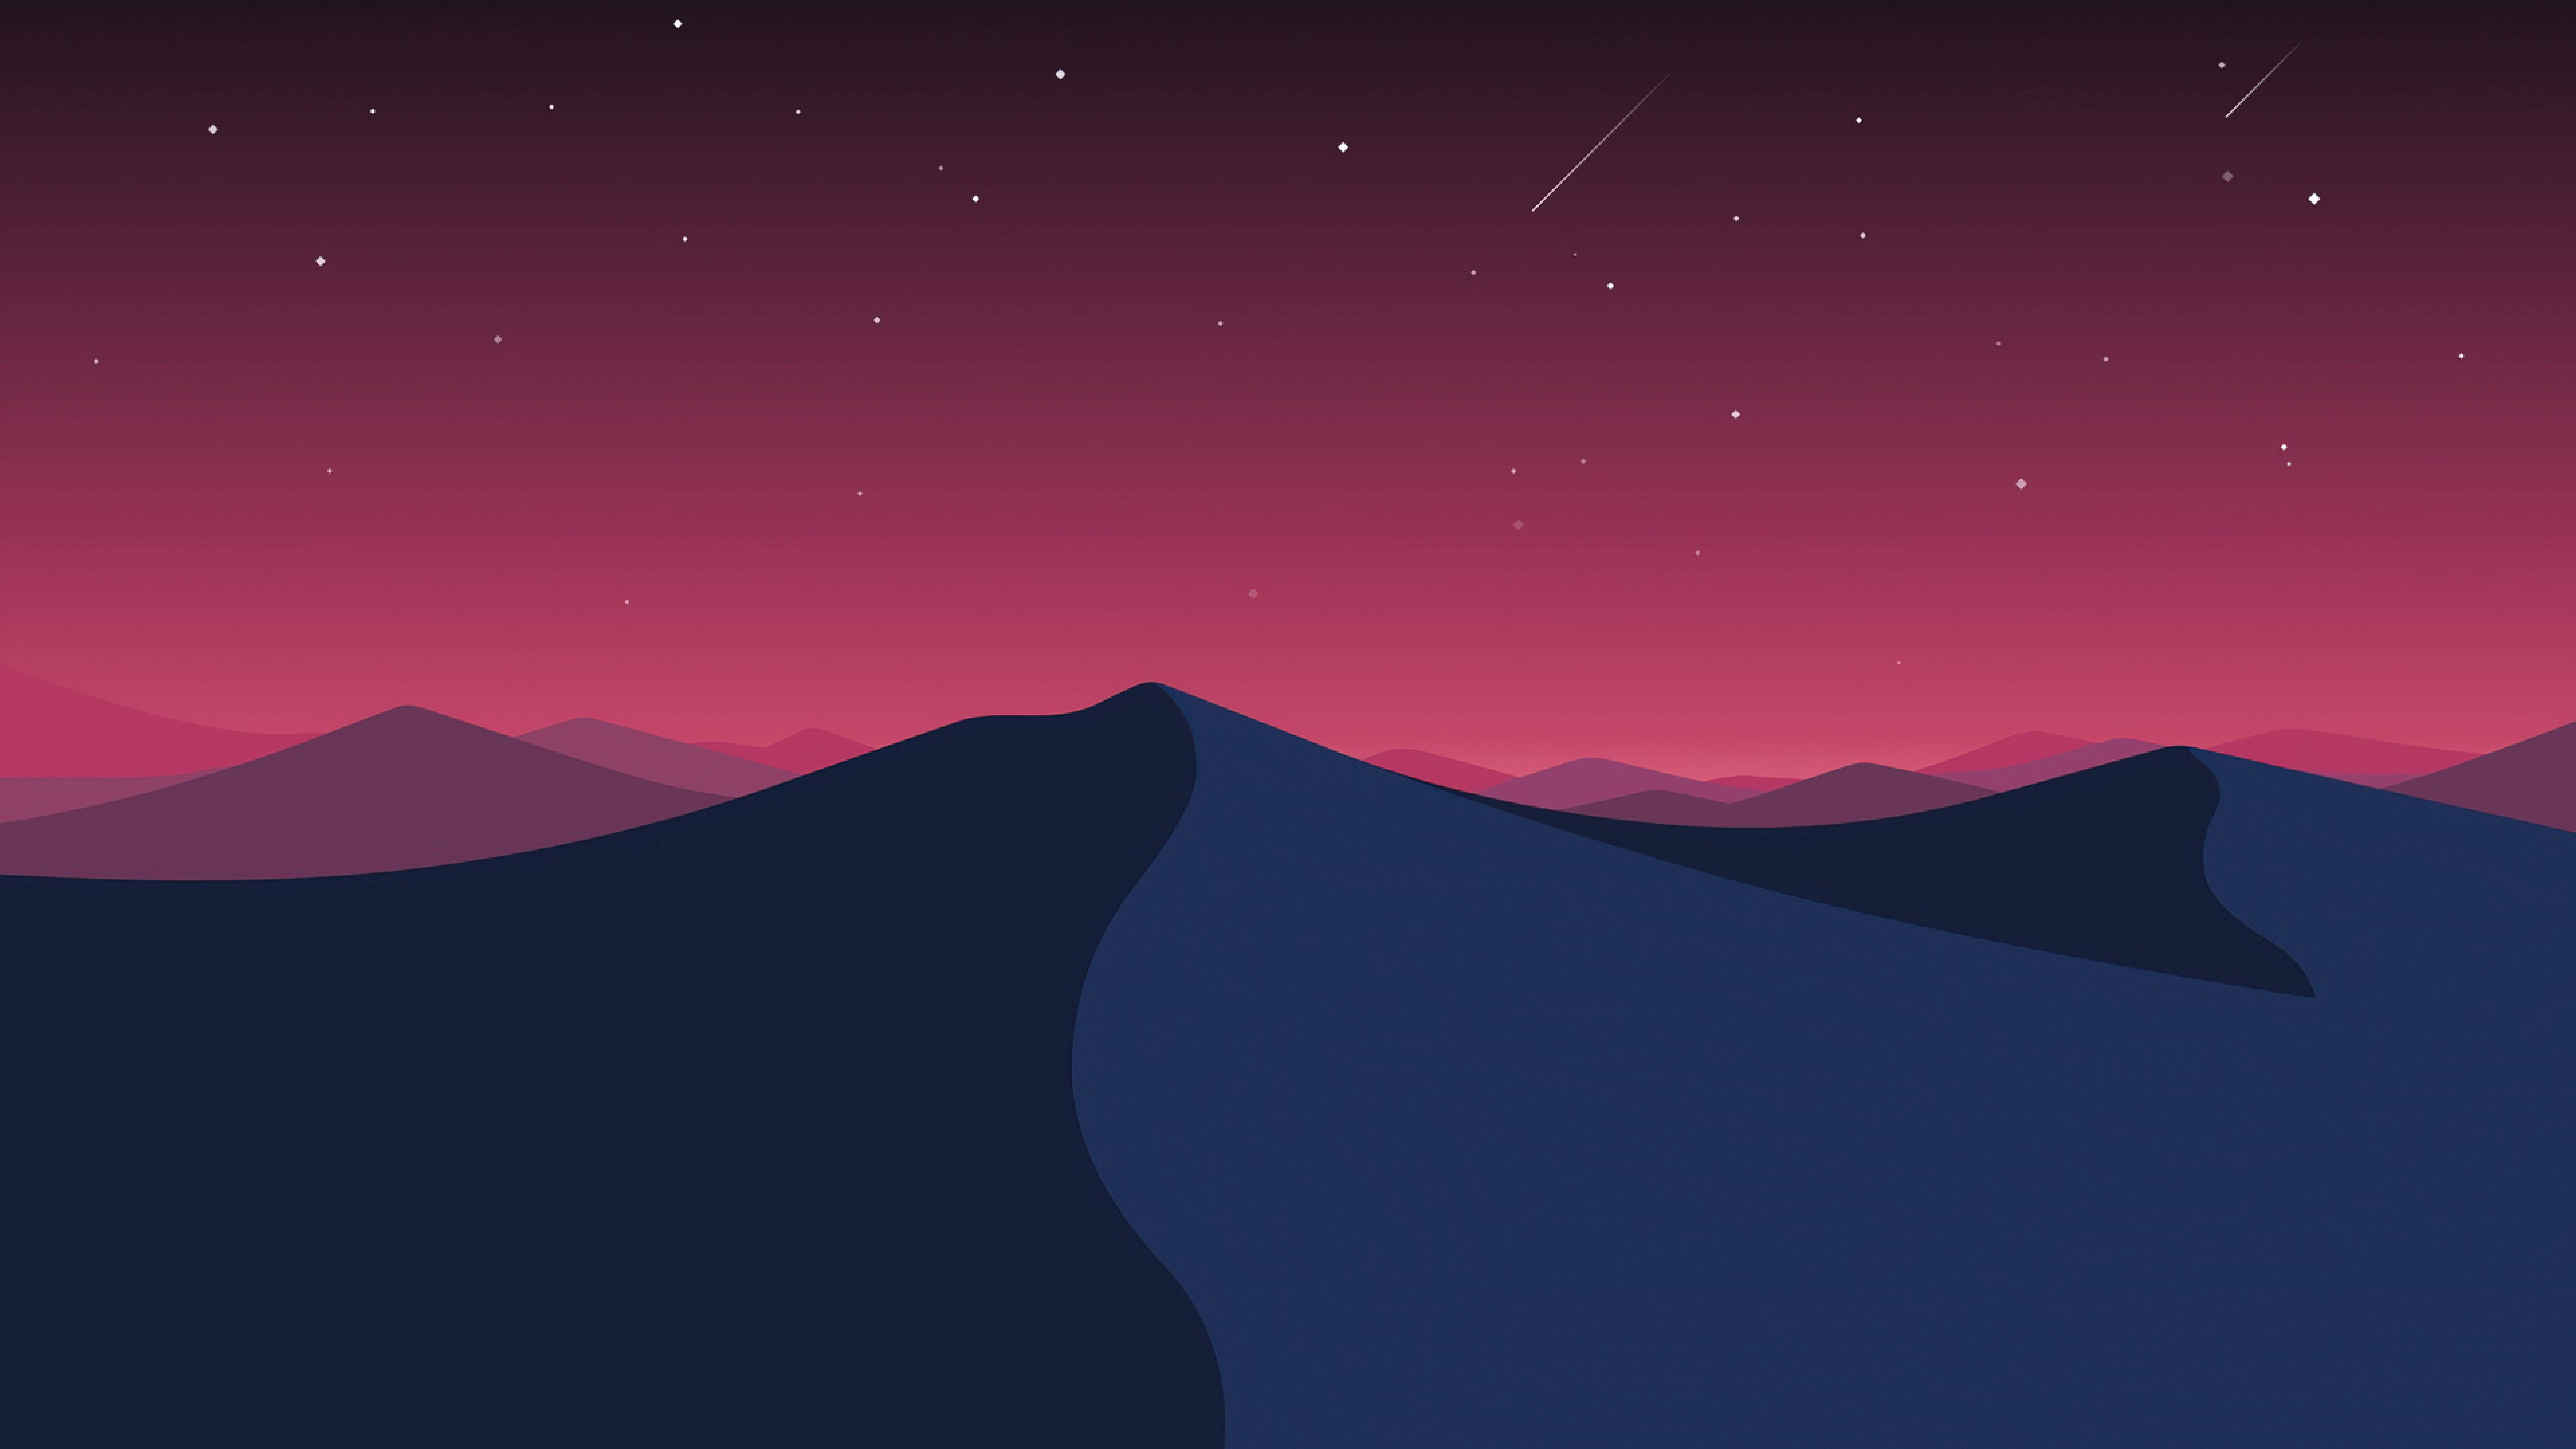 A mountain landscape with stars in the sky - Laptop, desert, art, cool, HD